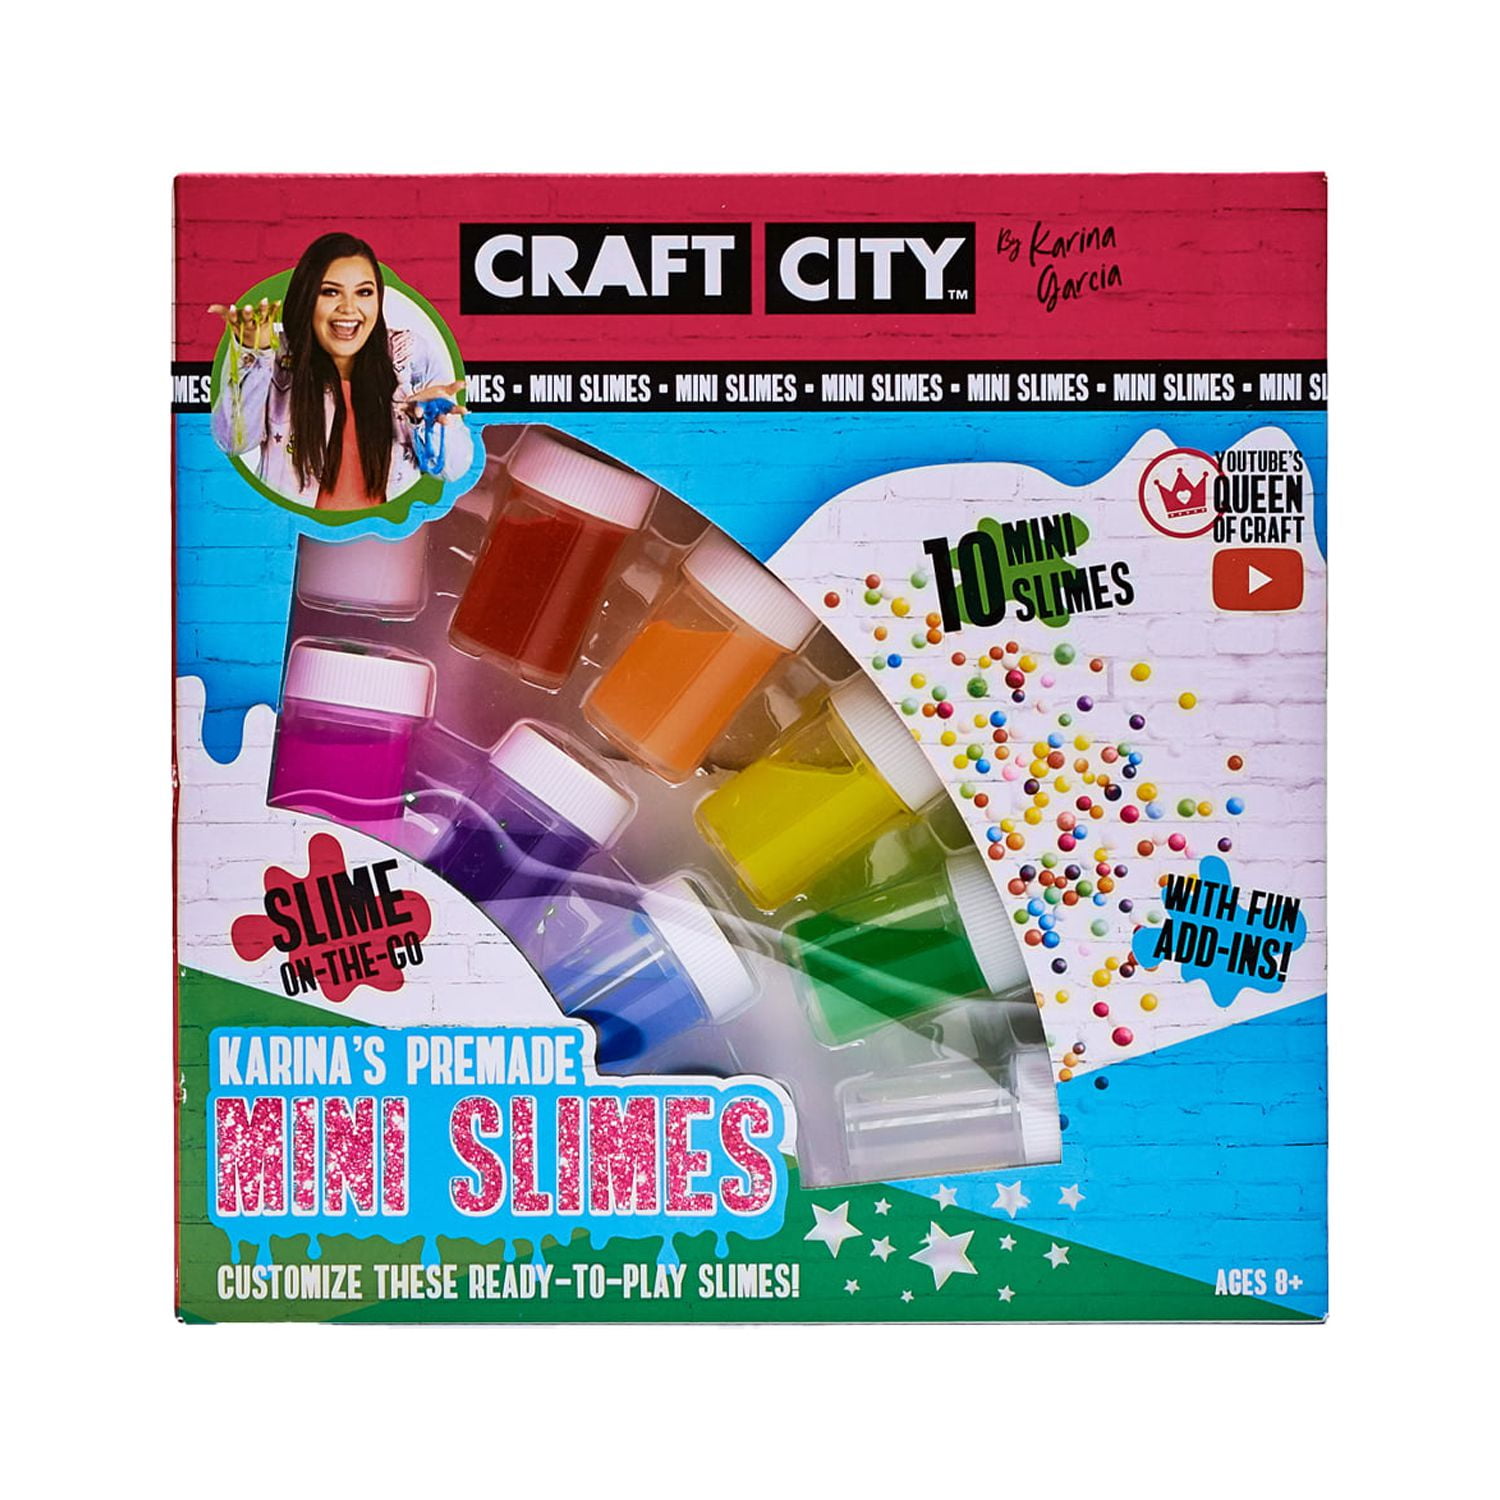 DIY Slime Kit Gift for Crafty Kids • A Family Lifestyle & Food Blog